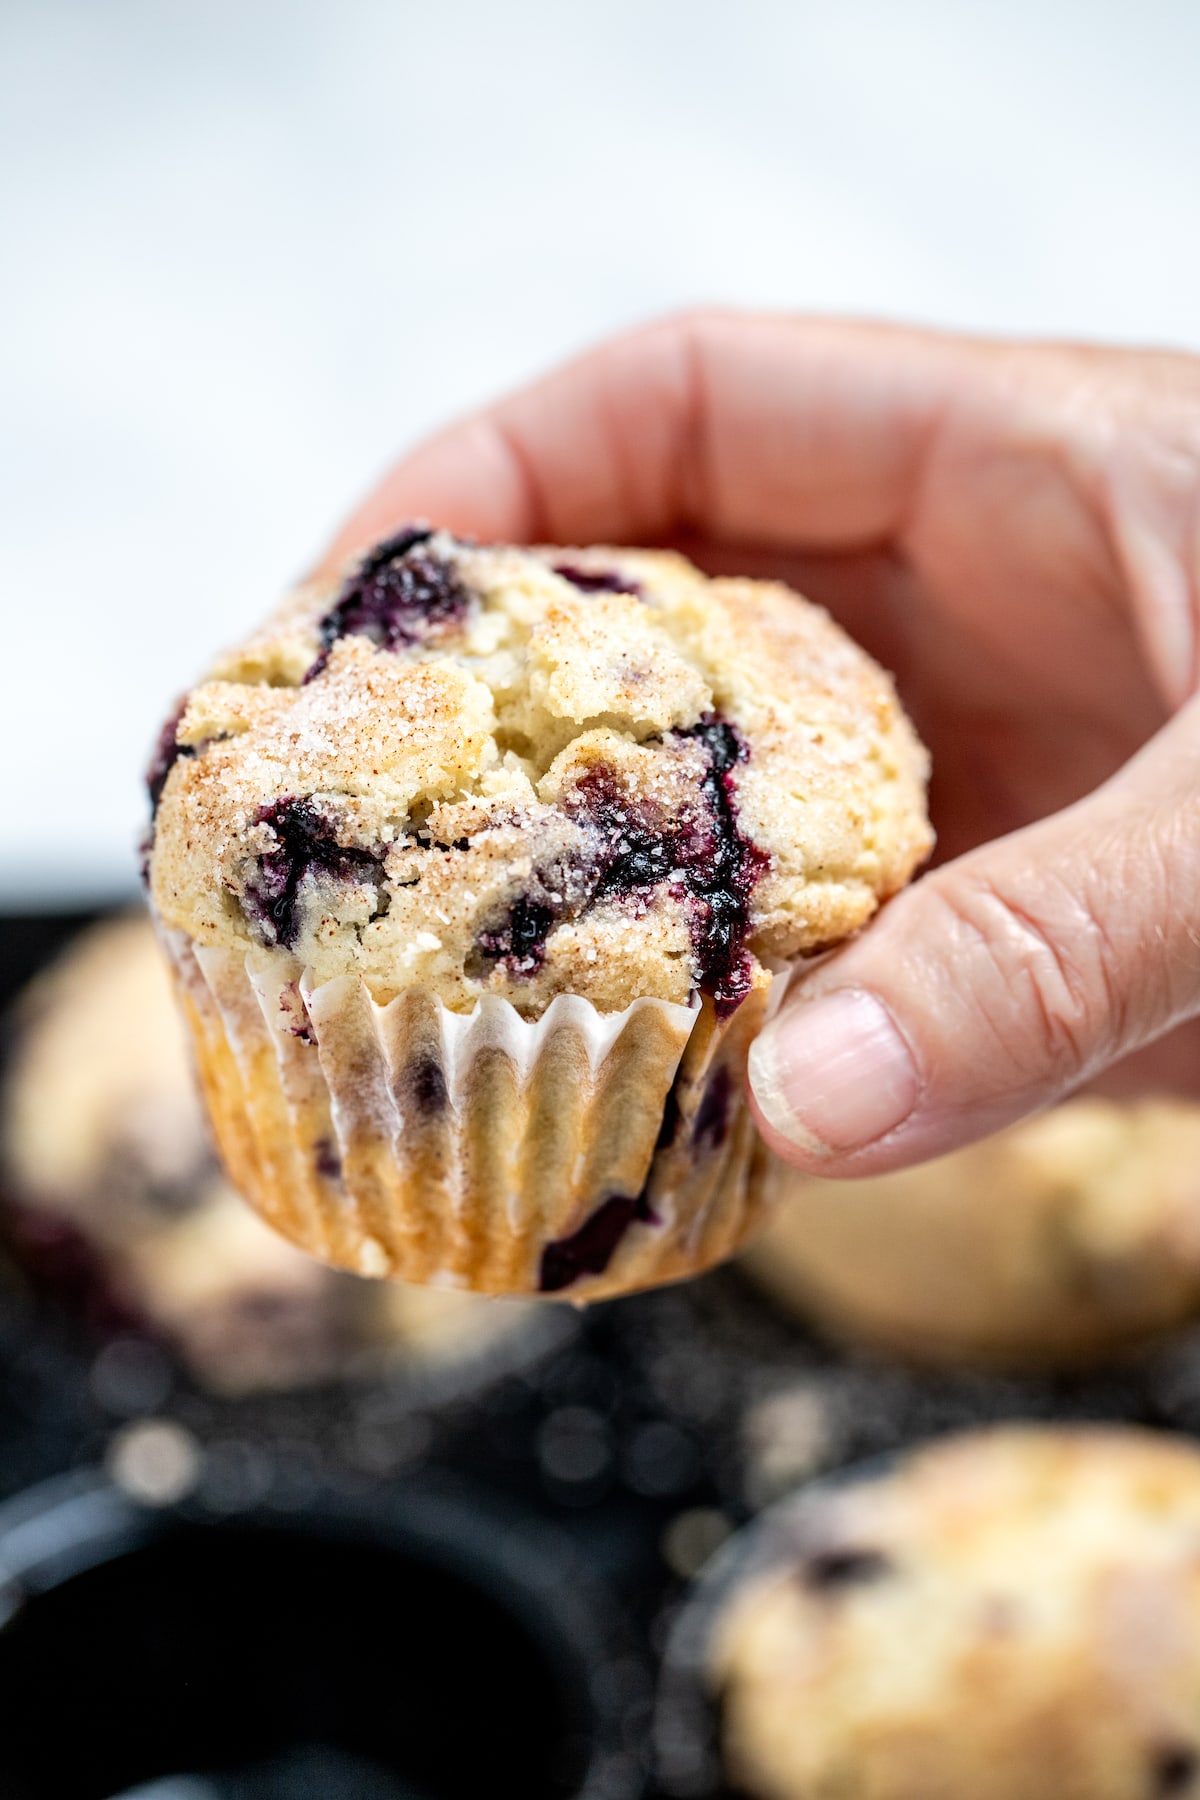 A hand holding a gluten free blueberry muffin above the tray of muffins.